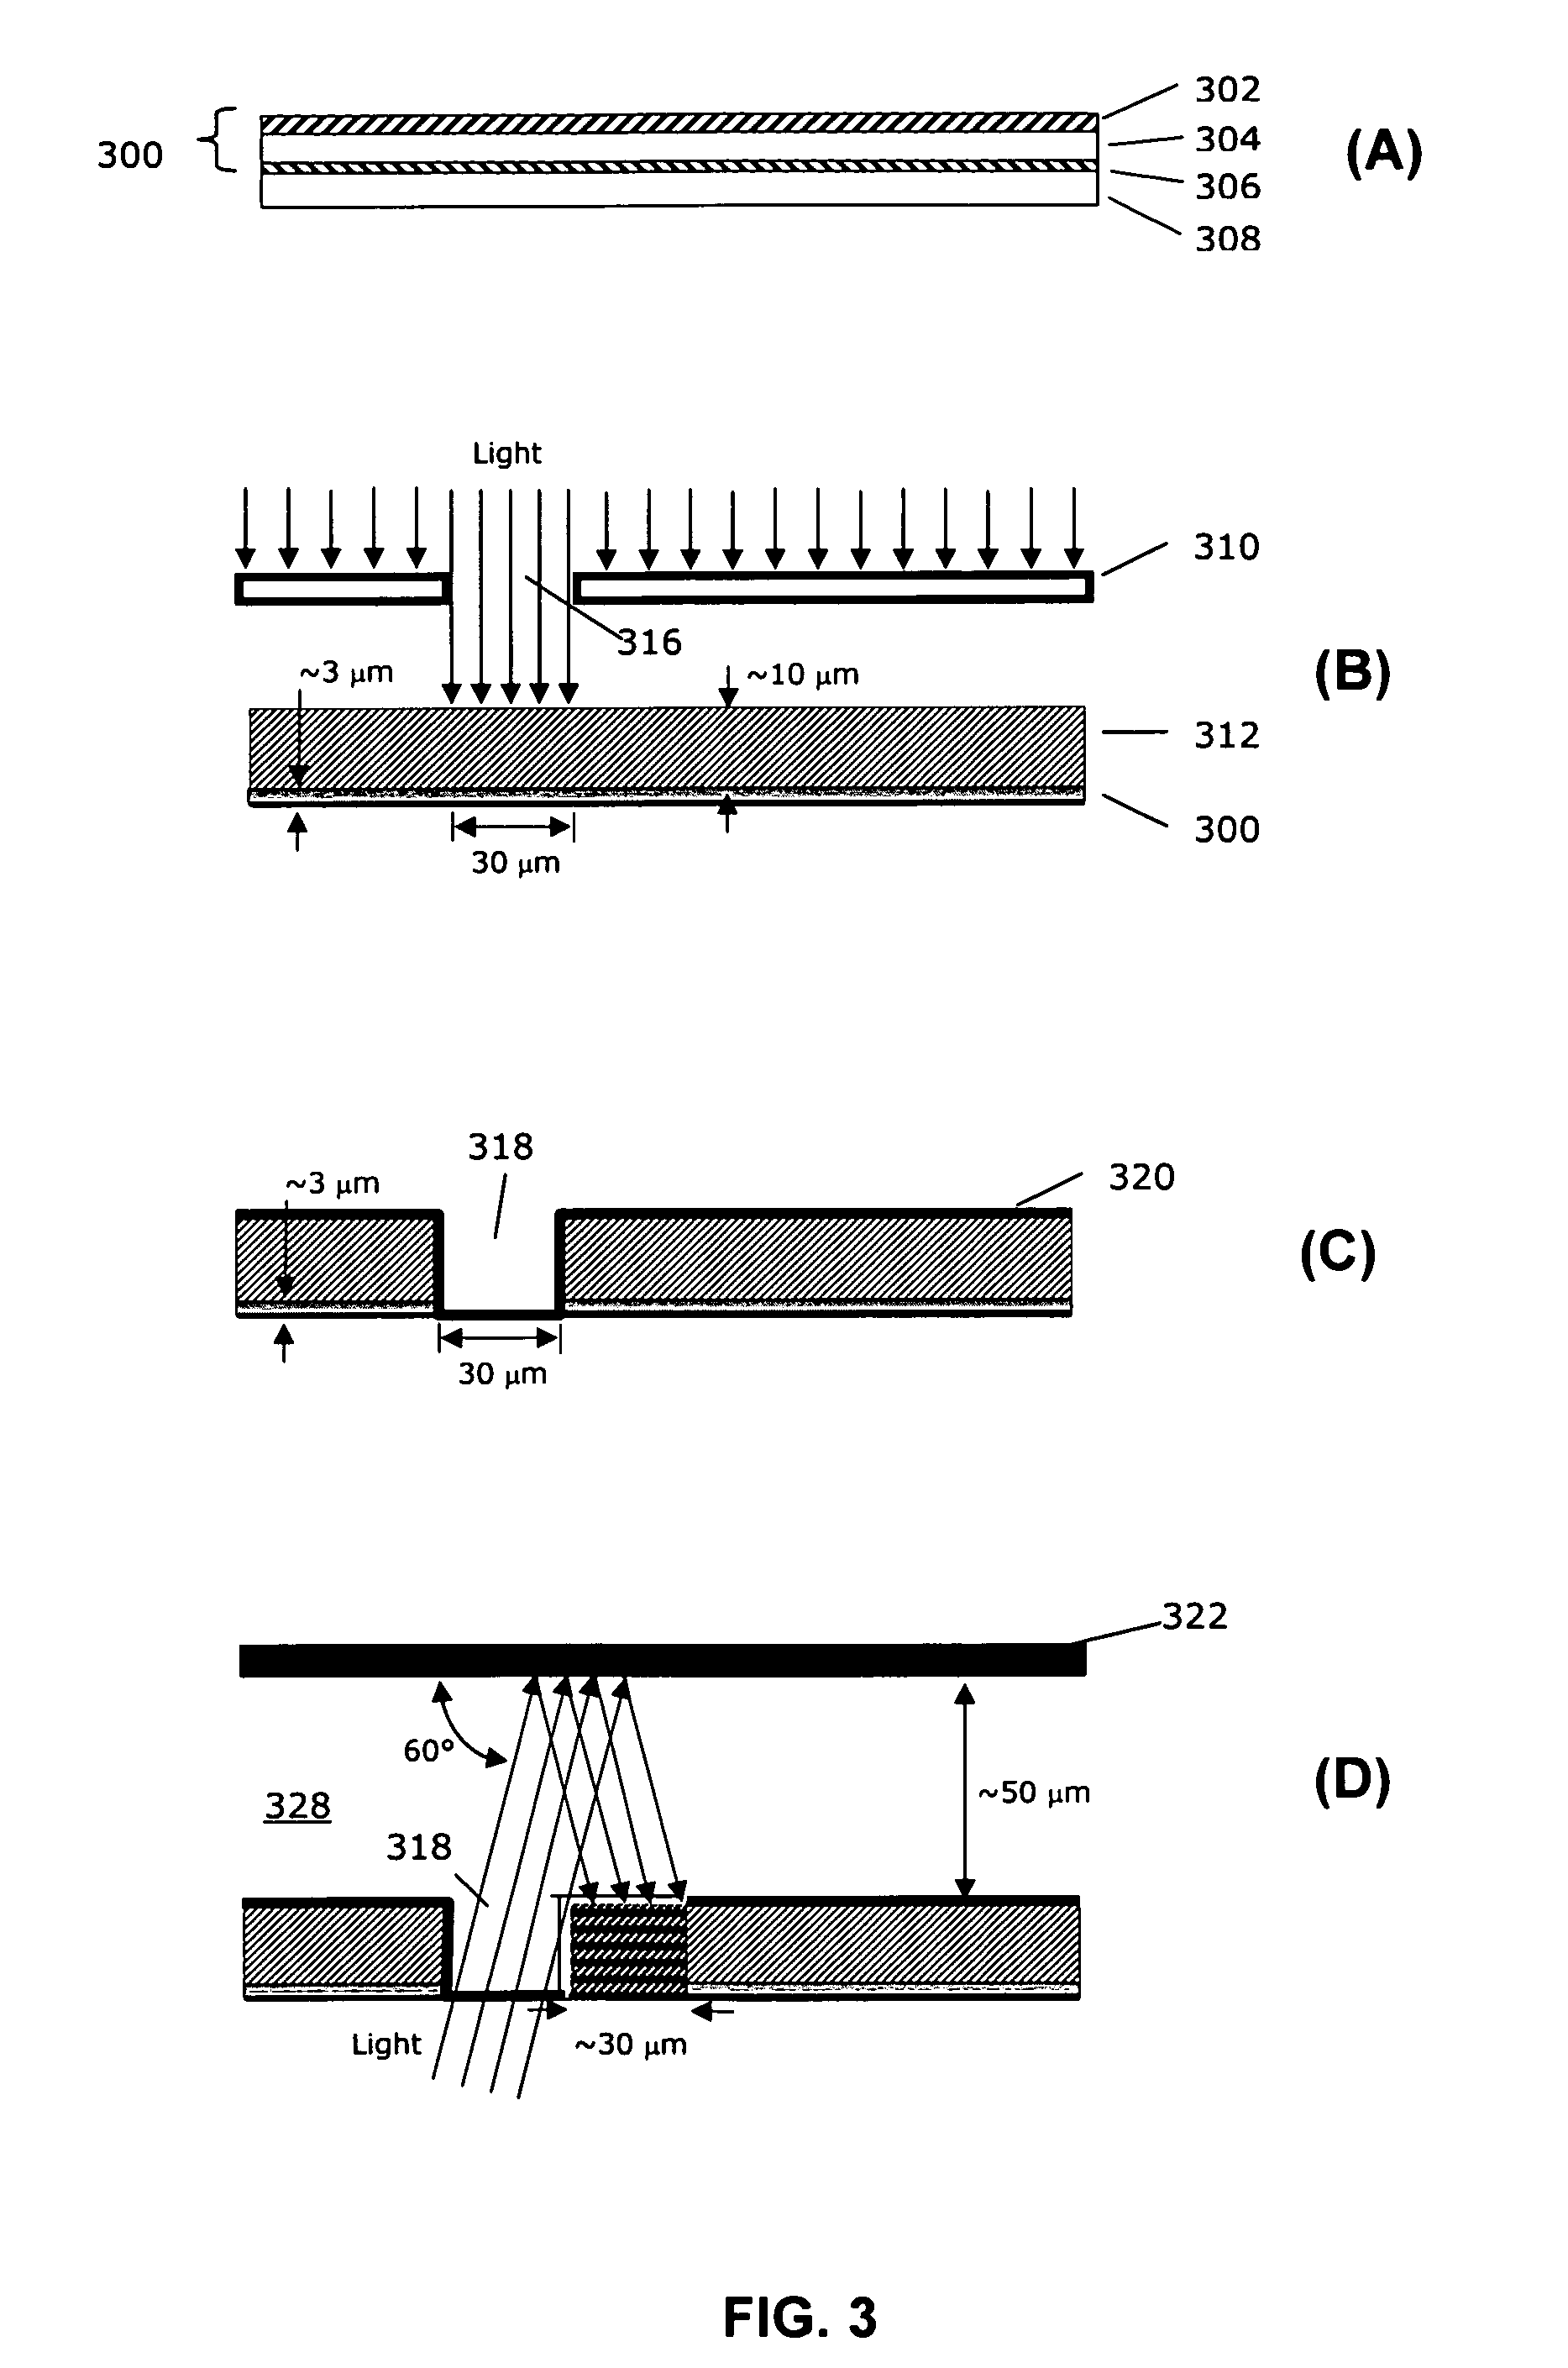 Method for making an improved thin film solar cell interconnect using etch and deposition process